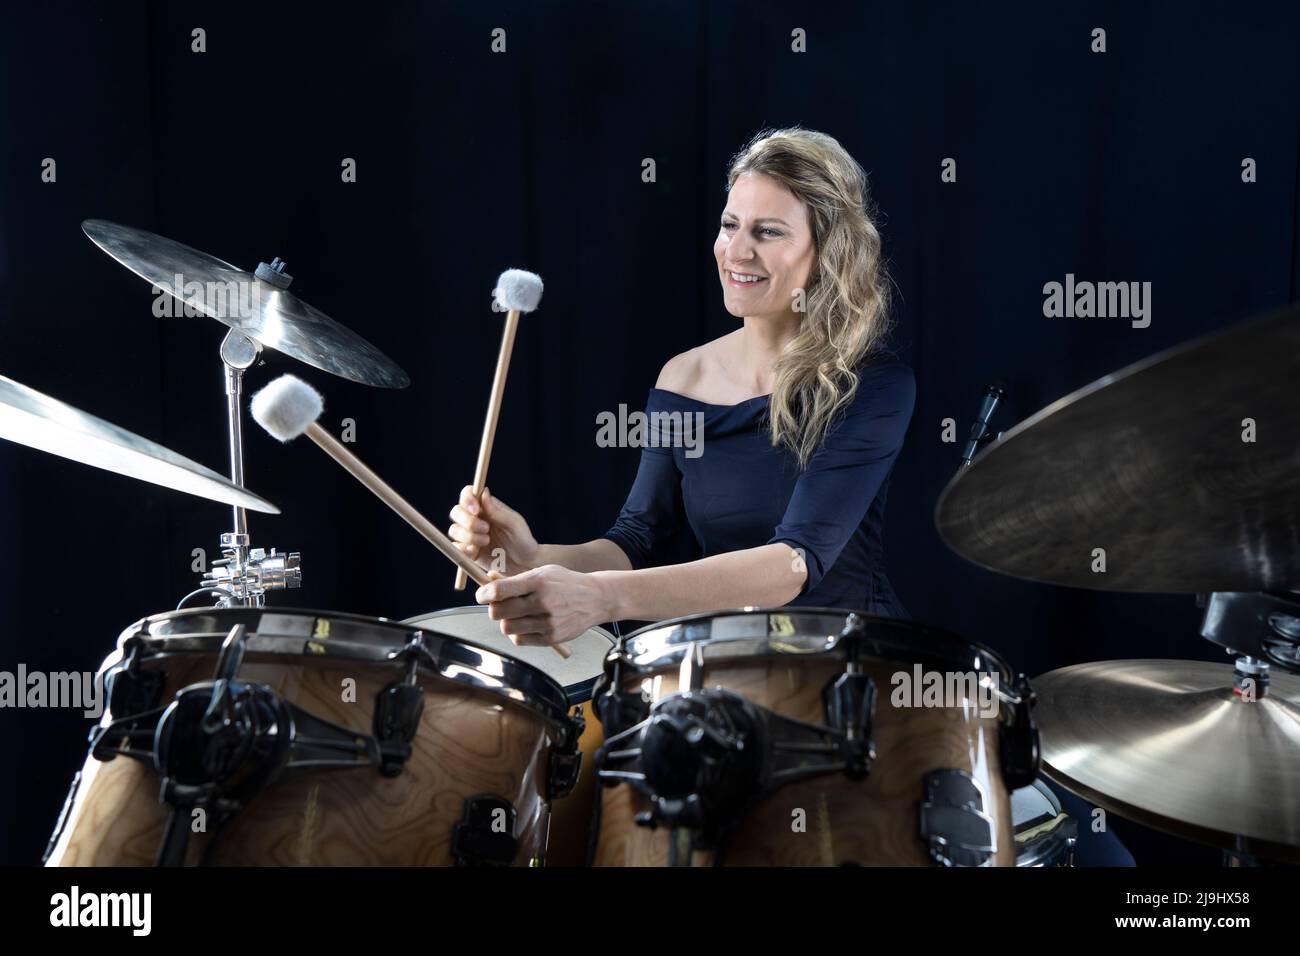 Smiling mature woman playing drums against black background Stock Photo